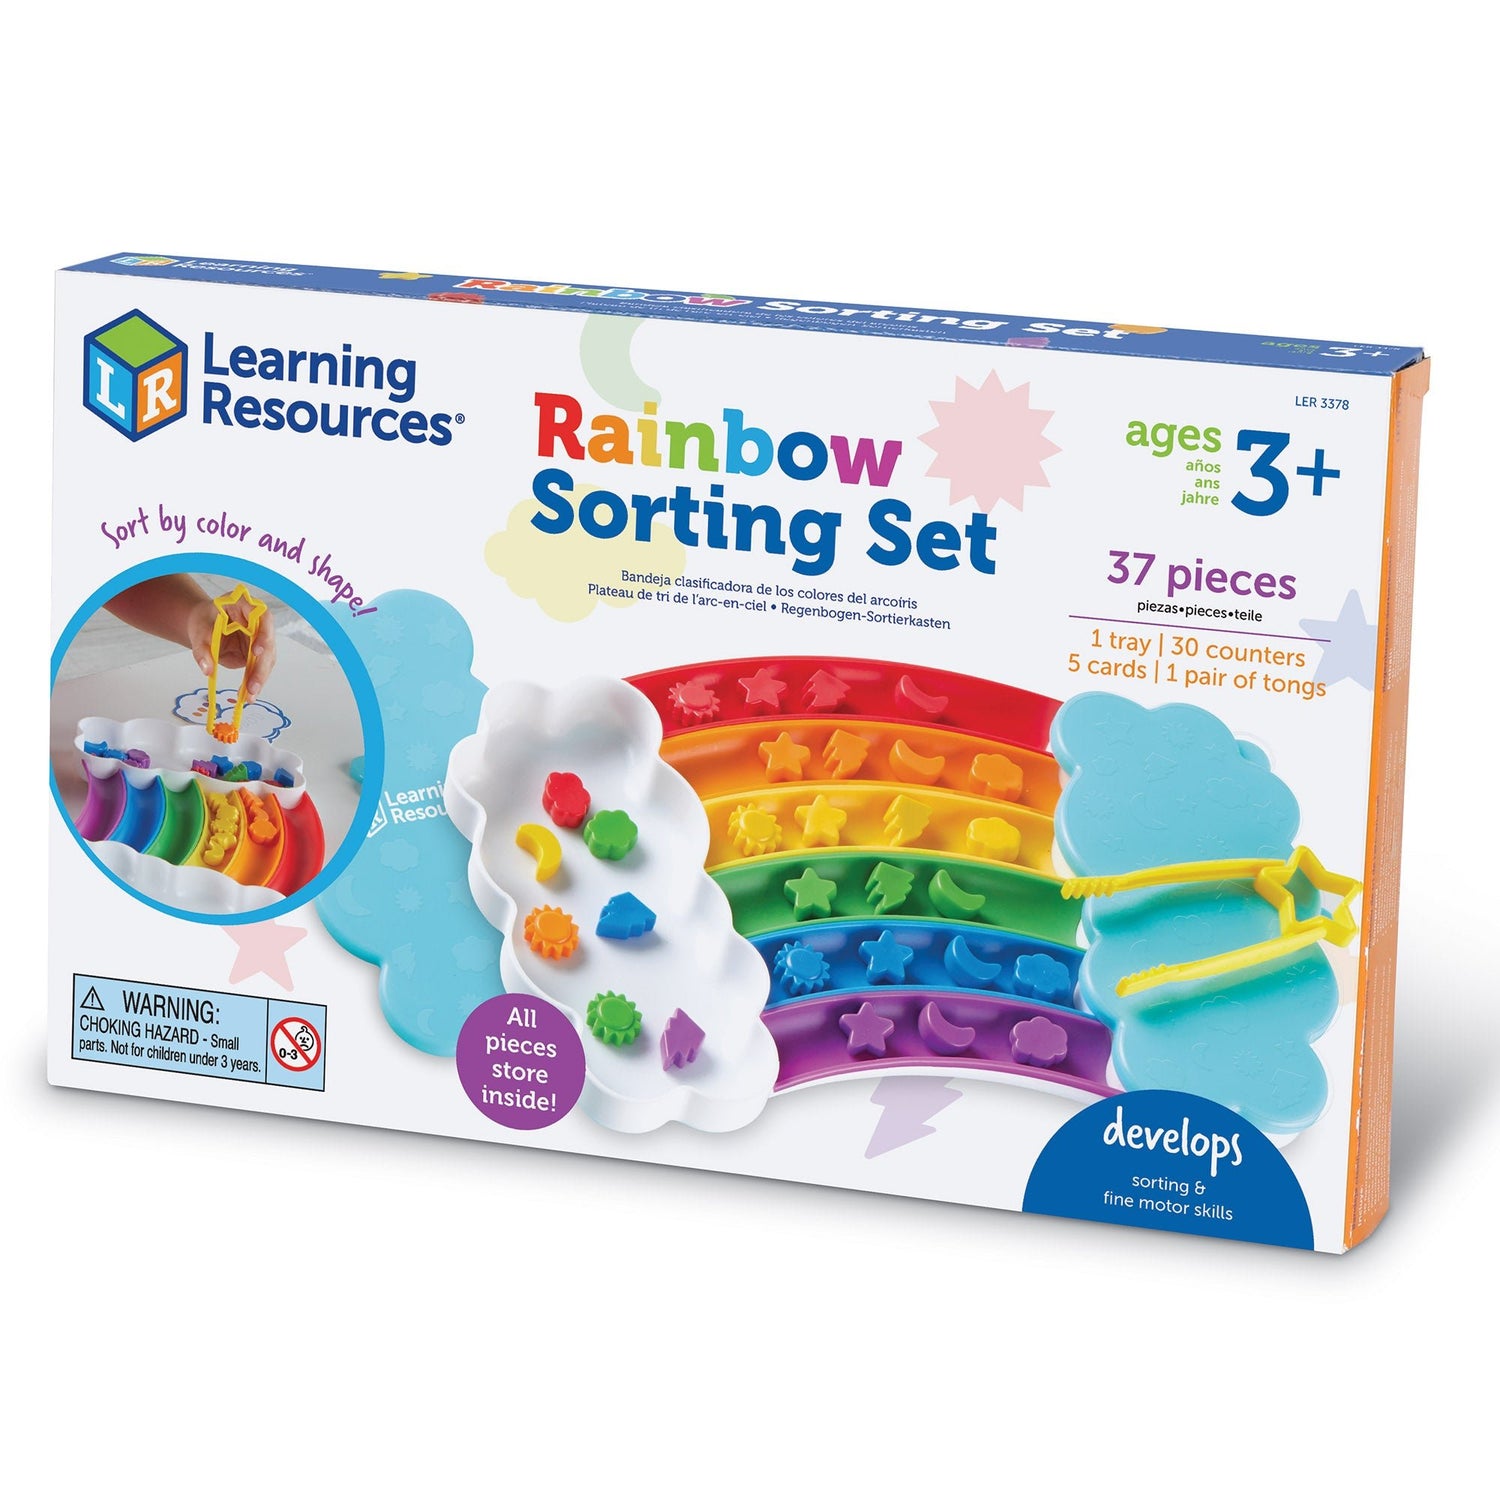 LEARNING RESOURCES | RAINBOW SORTING SET by LEARNING RESOURCES - The Playful Collective